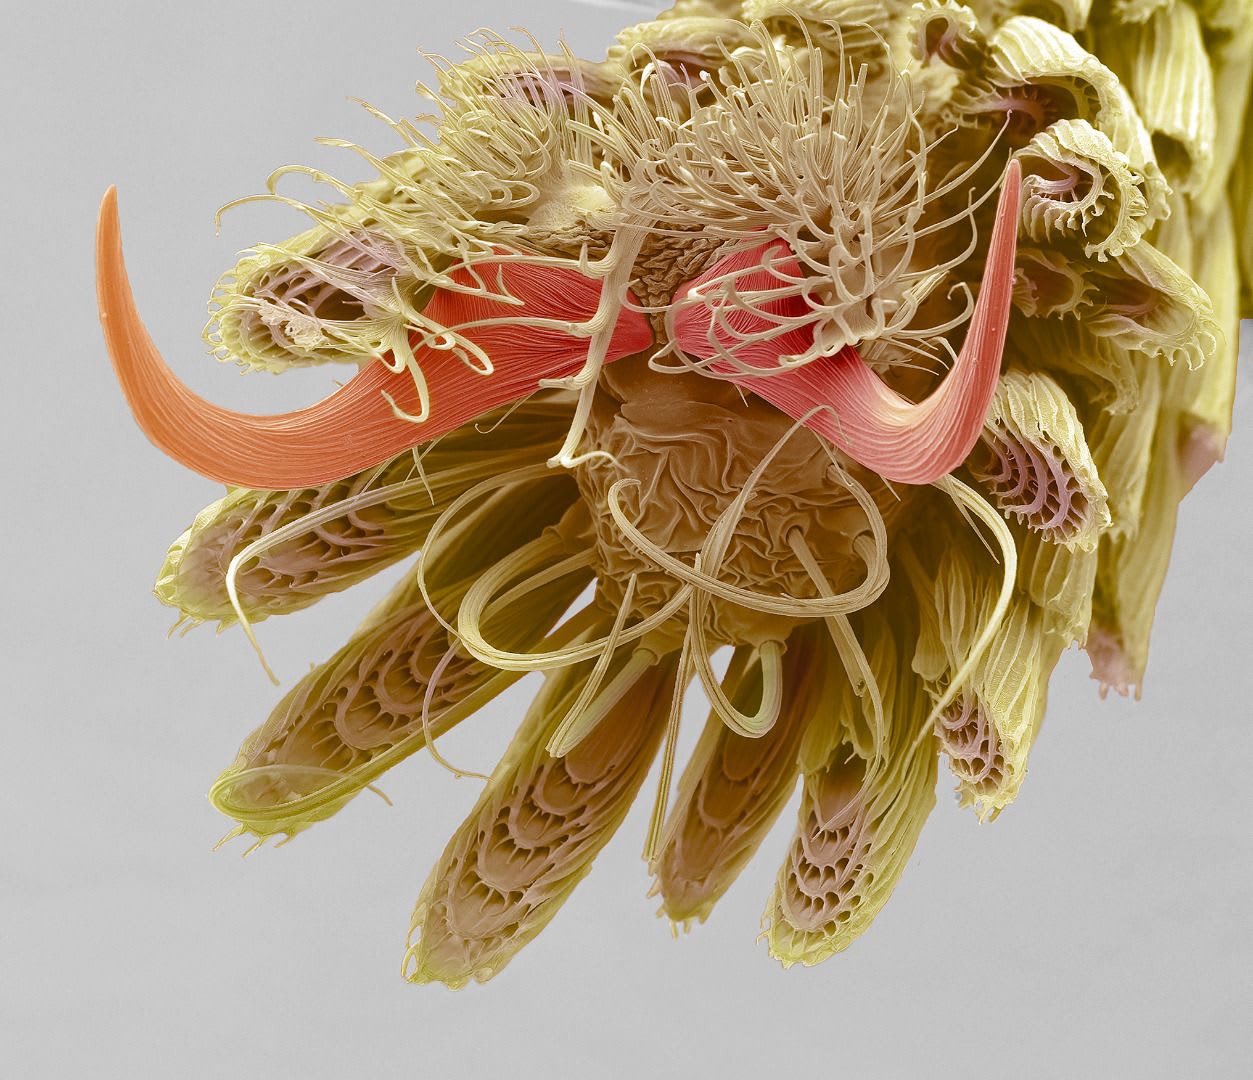 A mosquito's foot at 800X magnification | Electron microscope, Things under a microscope, Mosquito